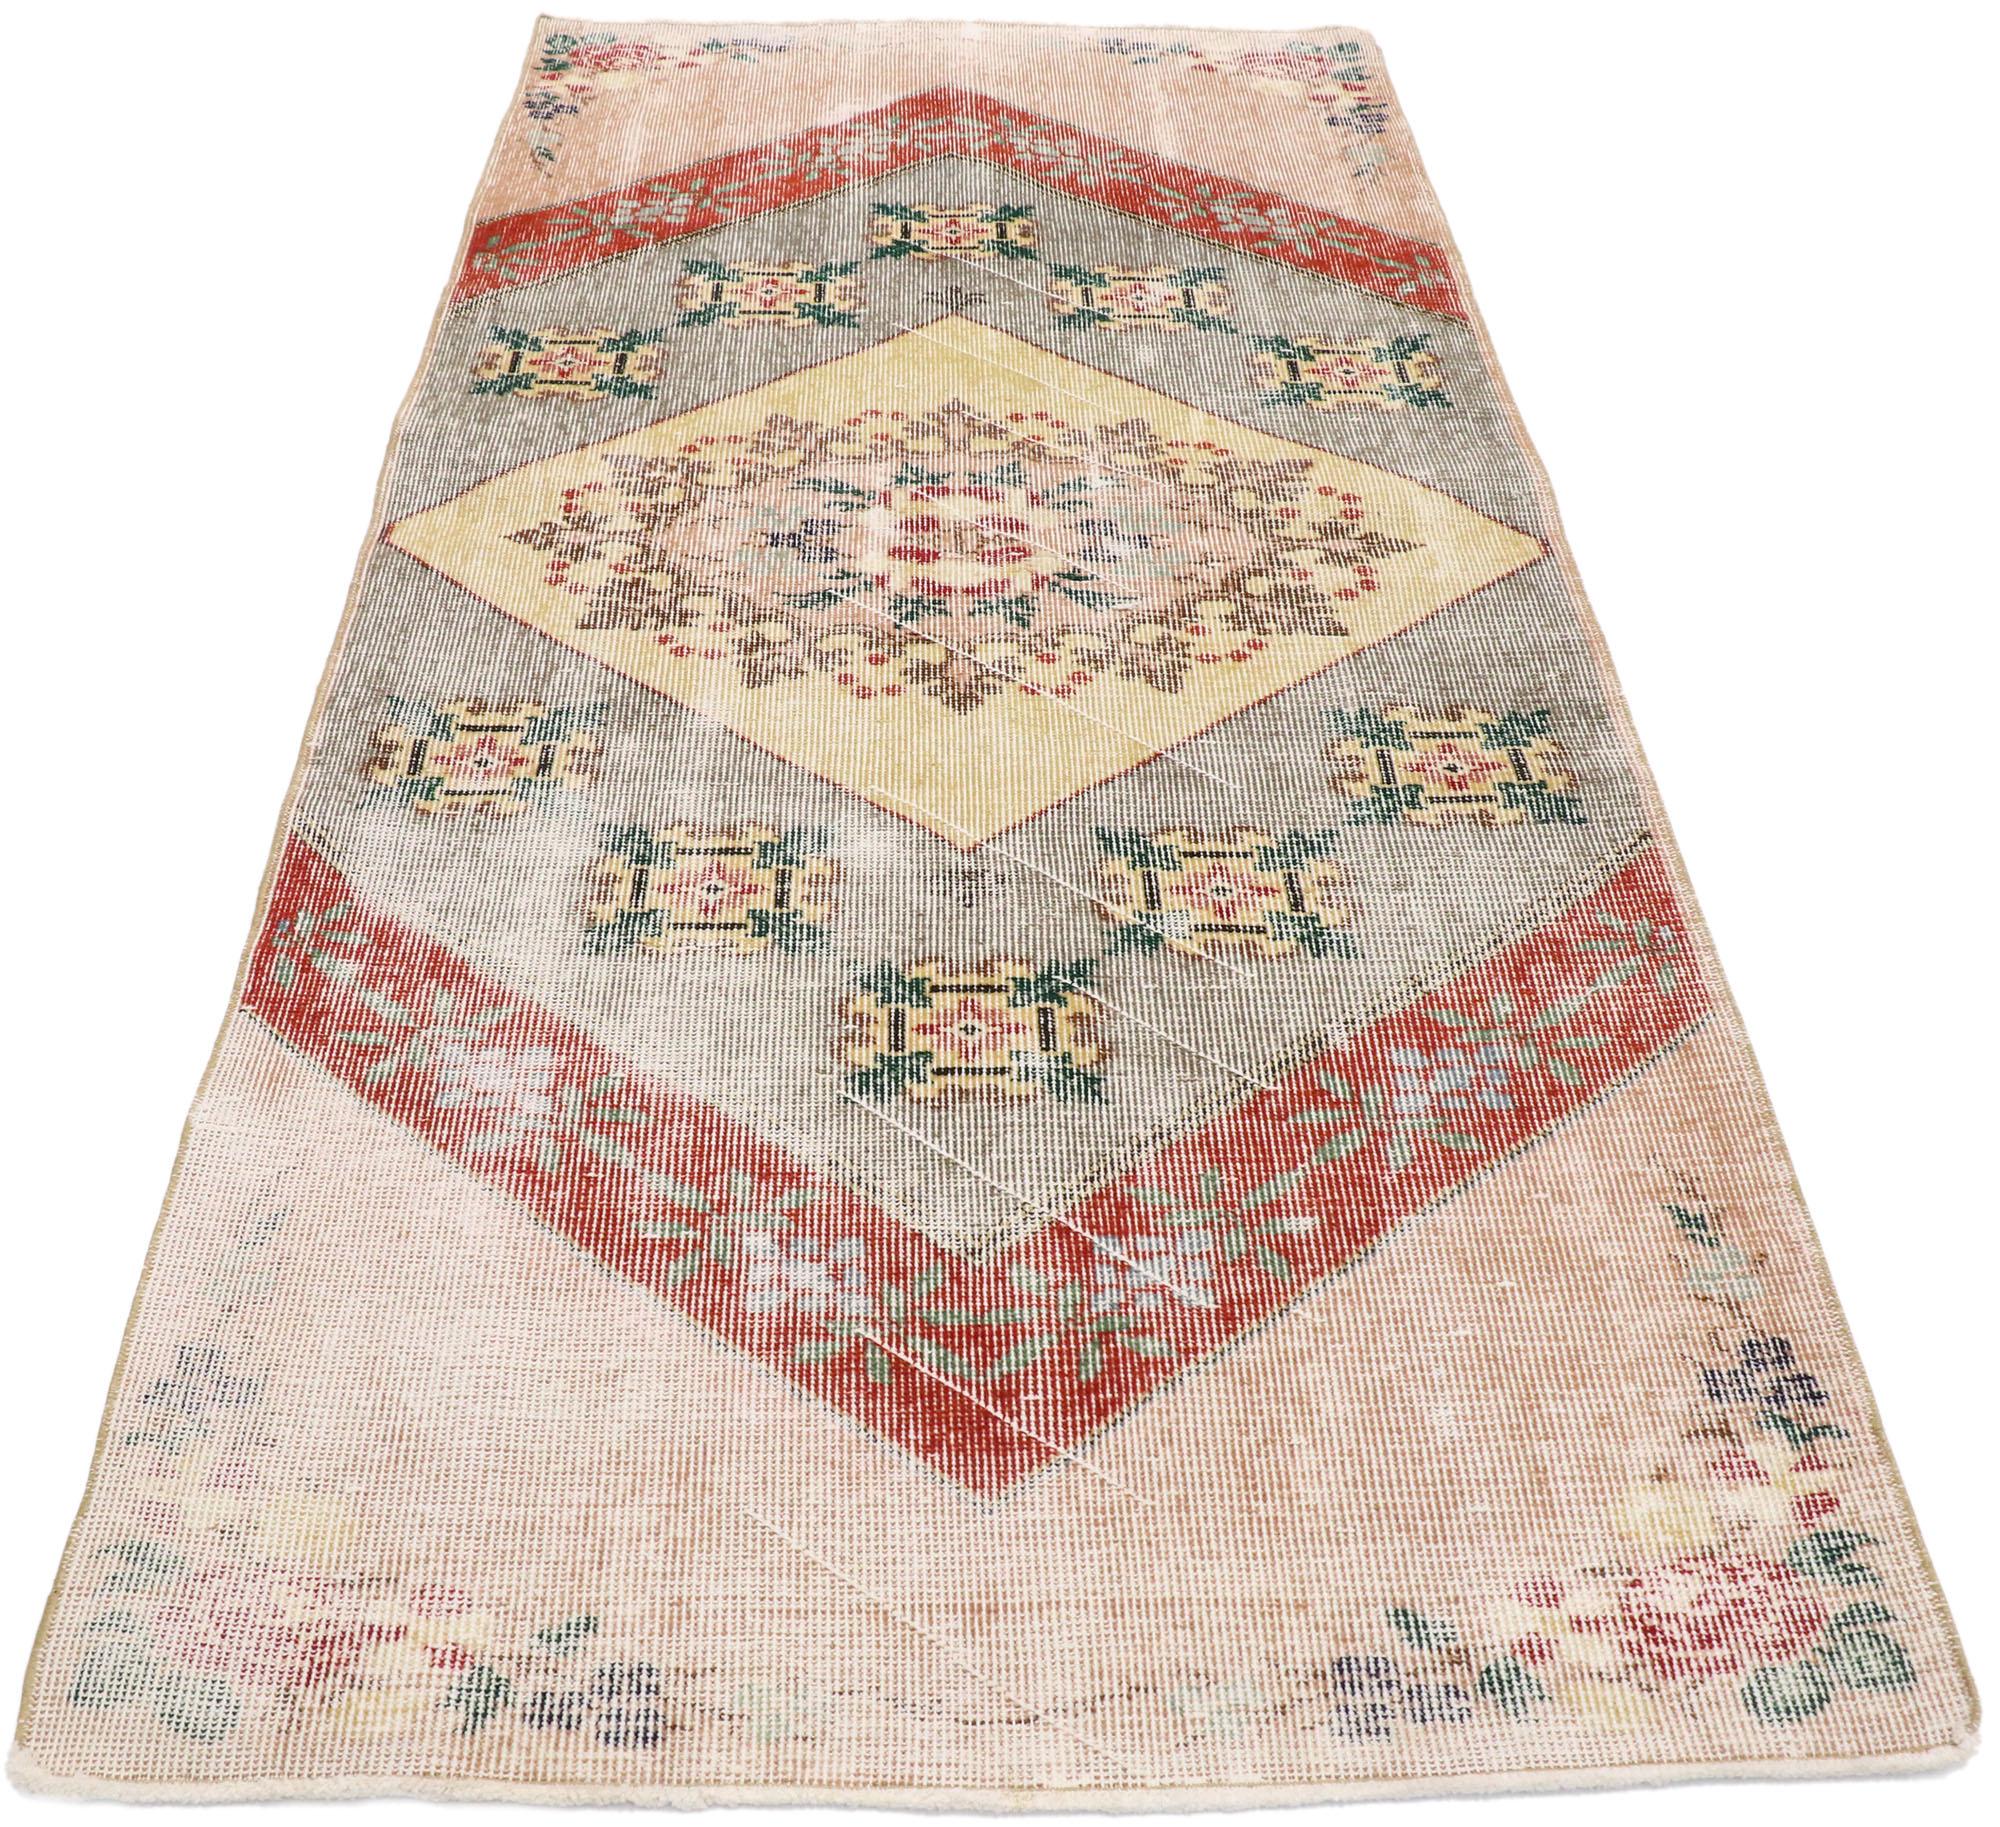 Distressed Vintage Turkish Sivas Rug with Rustic English Country Style In Distressed Condition For Sale In Dallas, TX